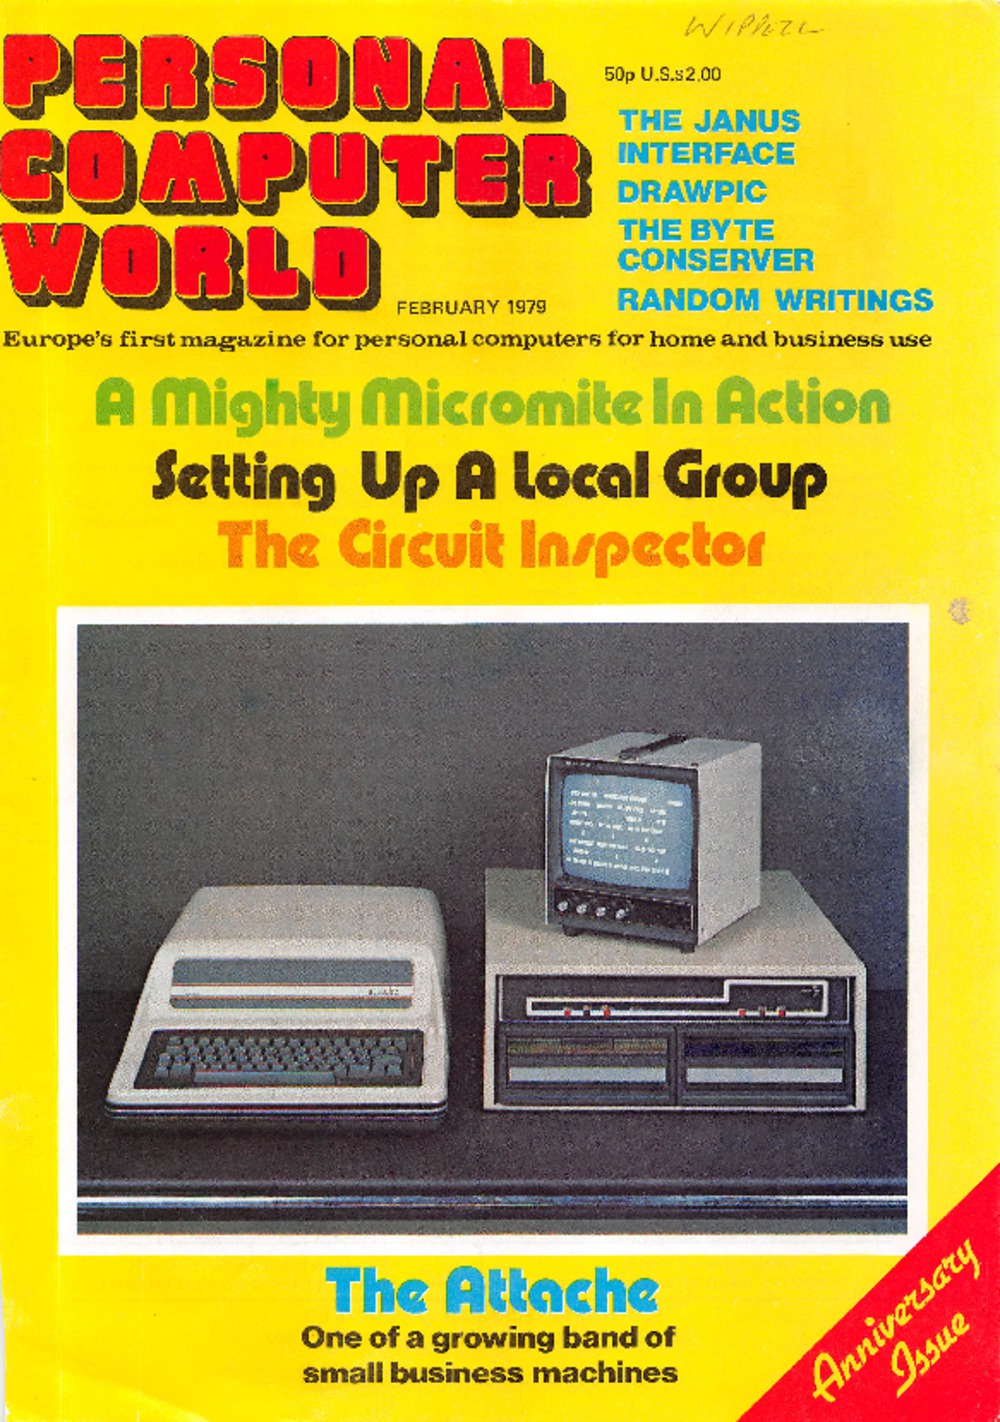 Article: Personal Computer World - February 1979